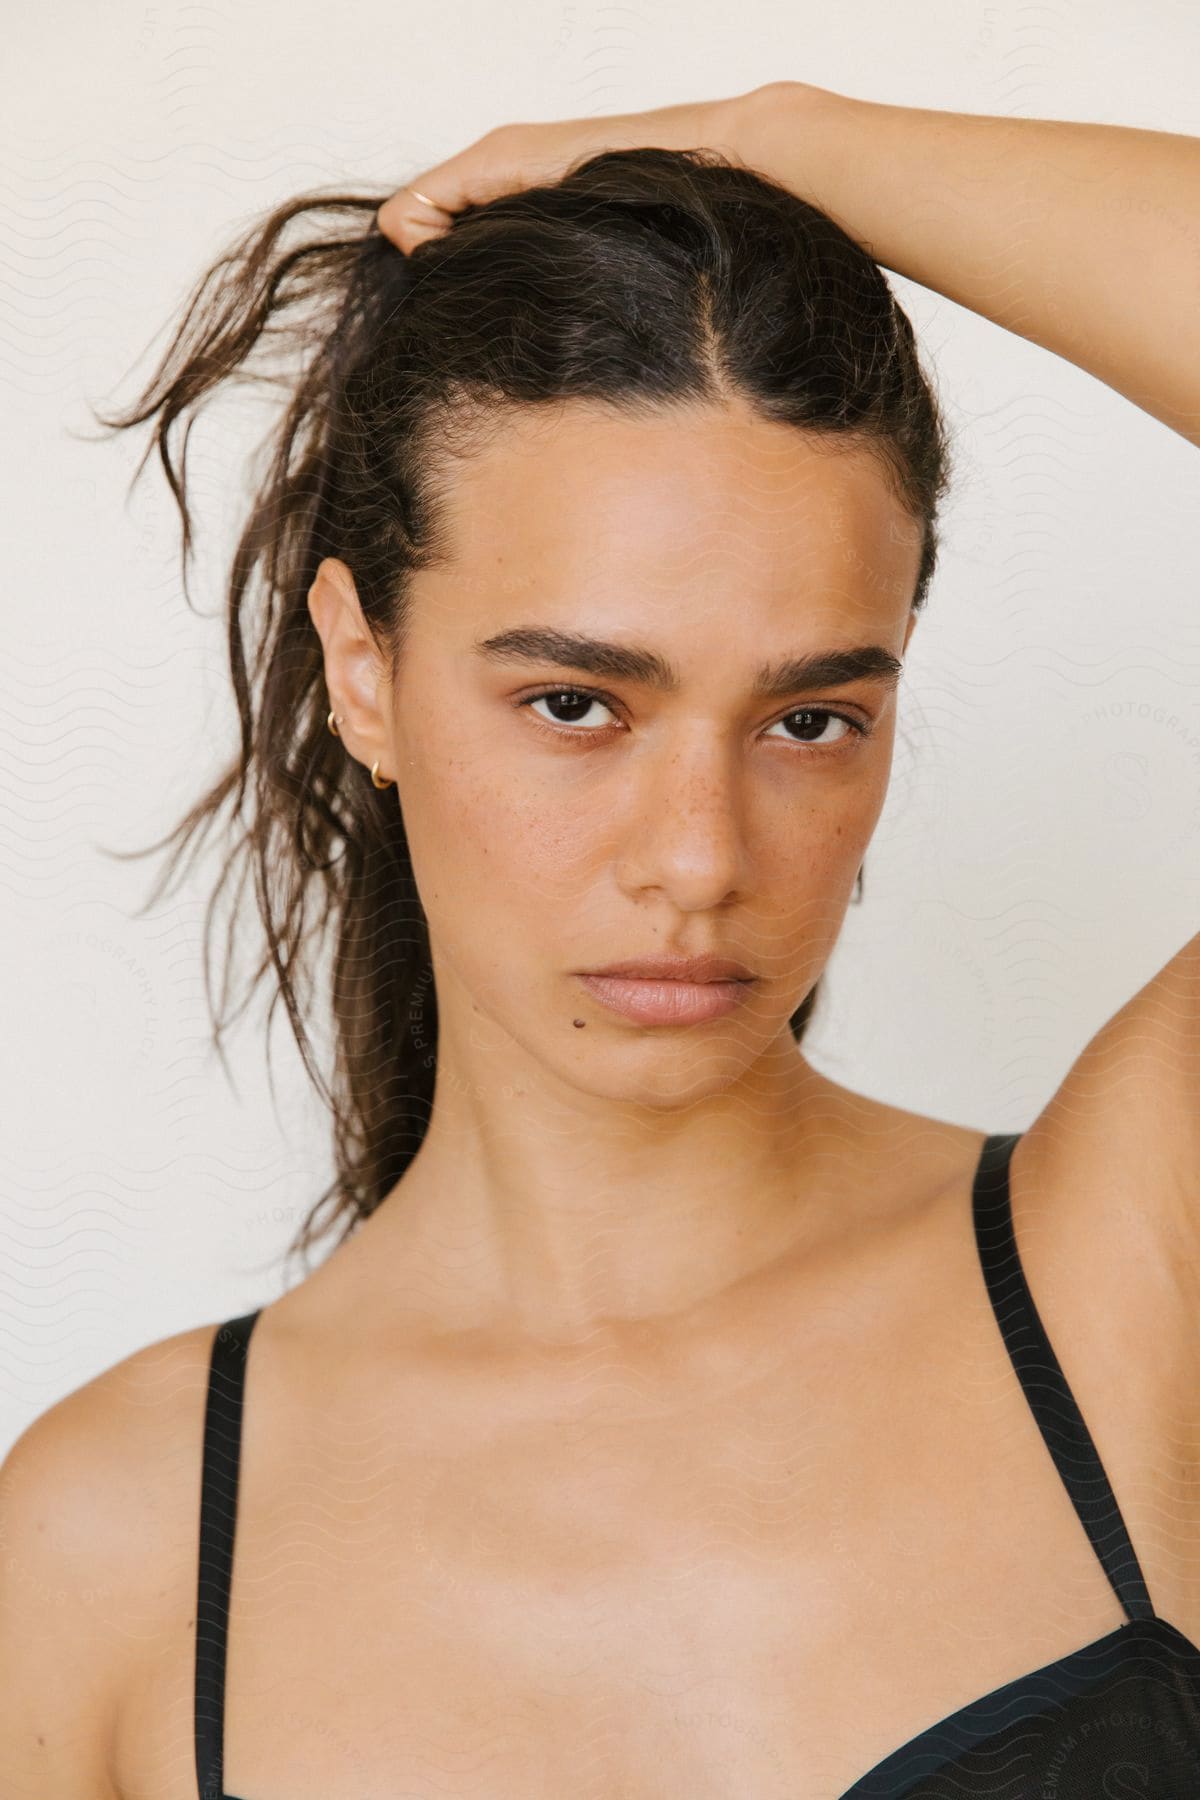 A model is pulling her dark hair back with her hand as she stares deeply at the camera.